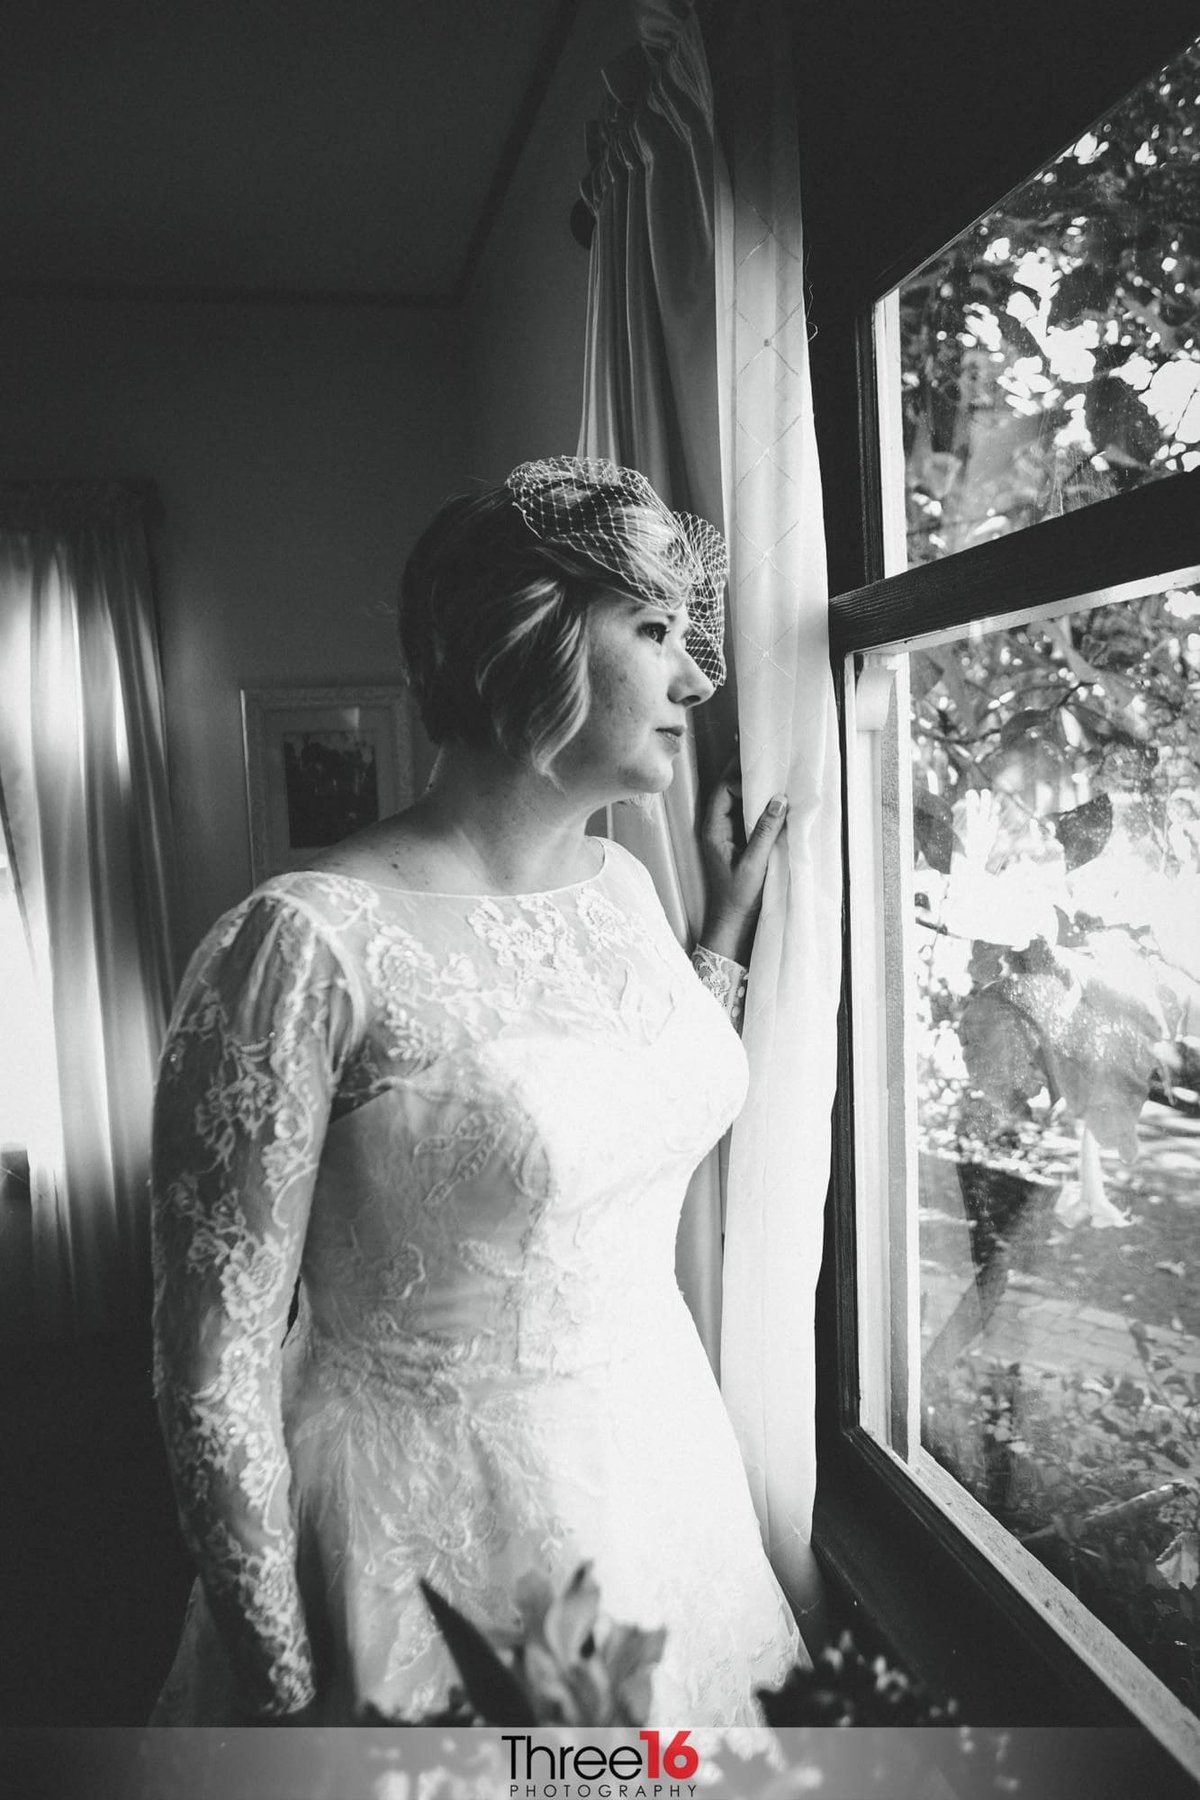 Black & White photo of Bride looking out the window prior the her wedding ceremony